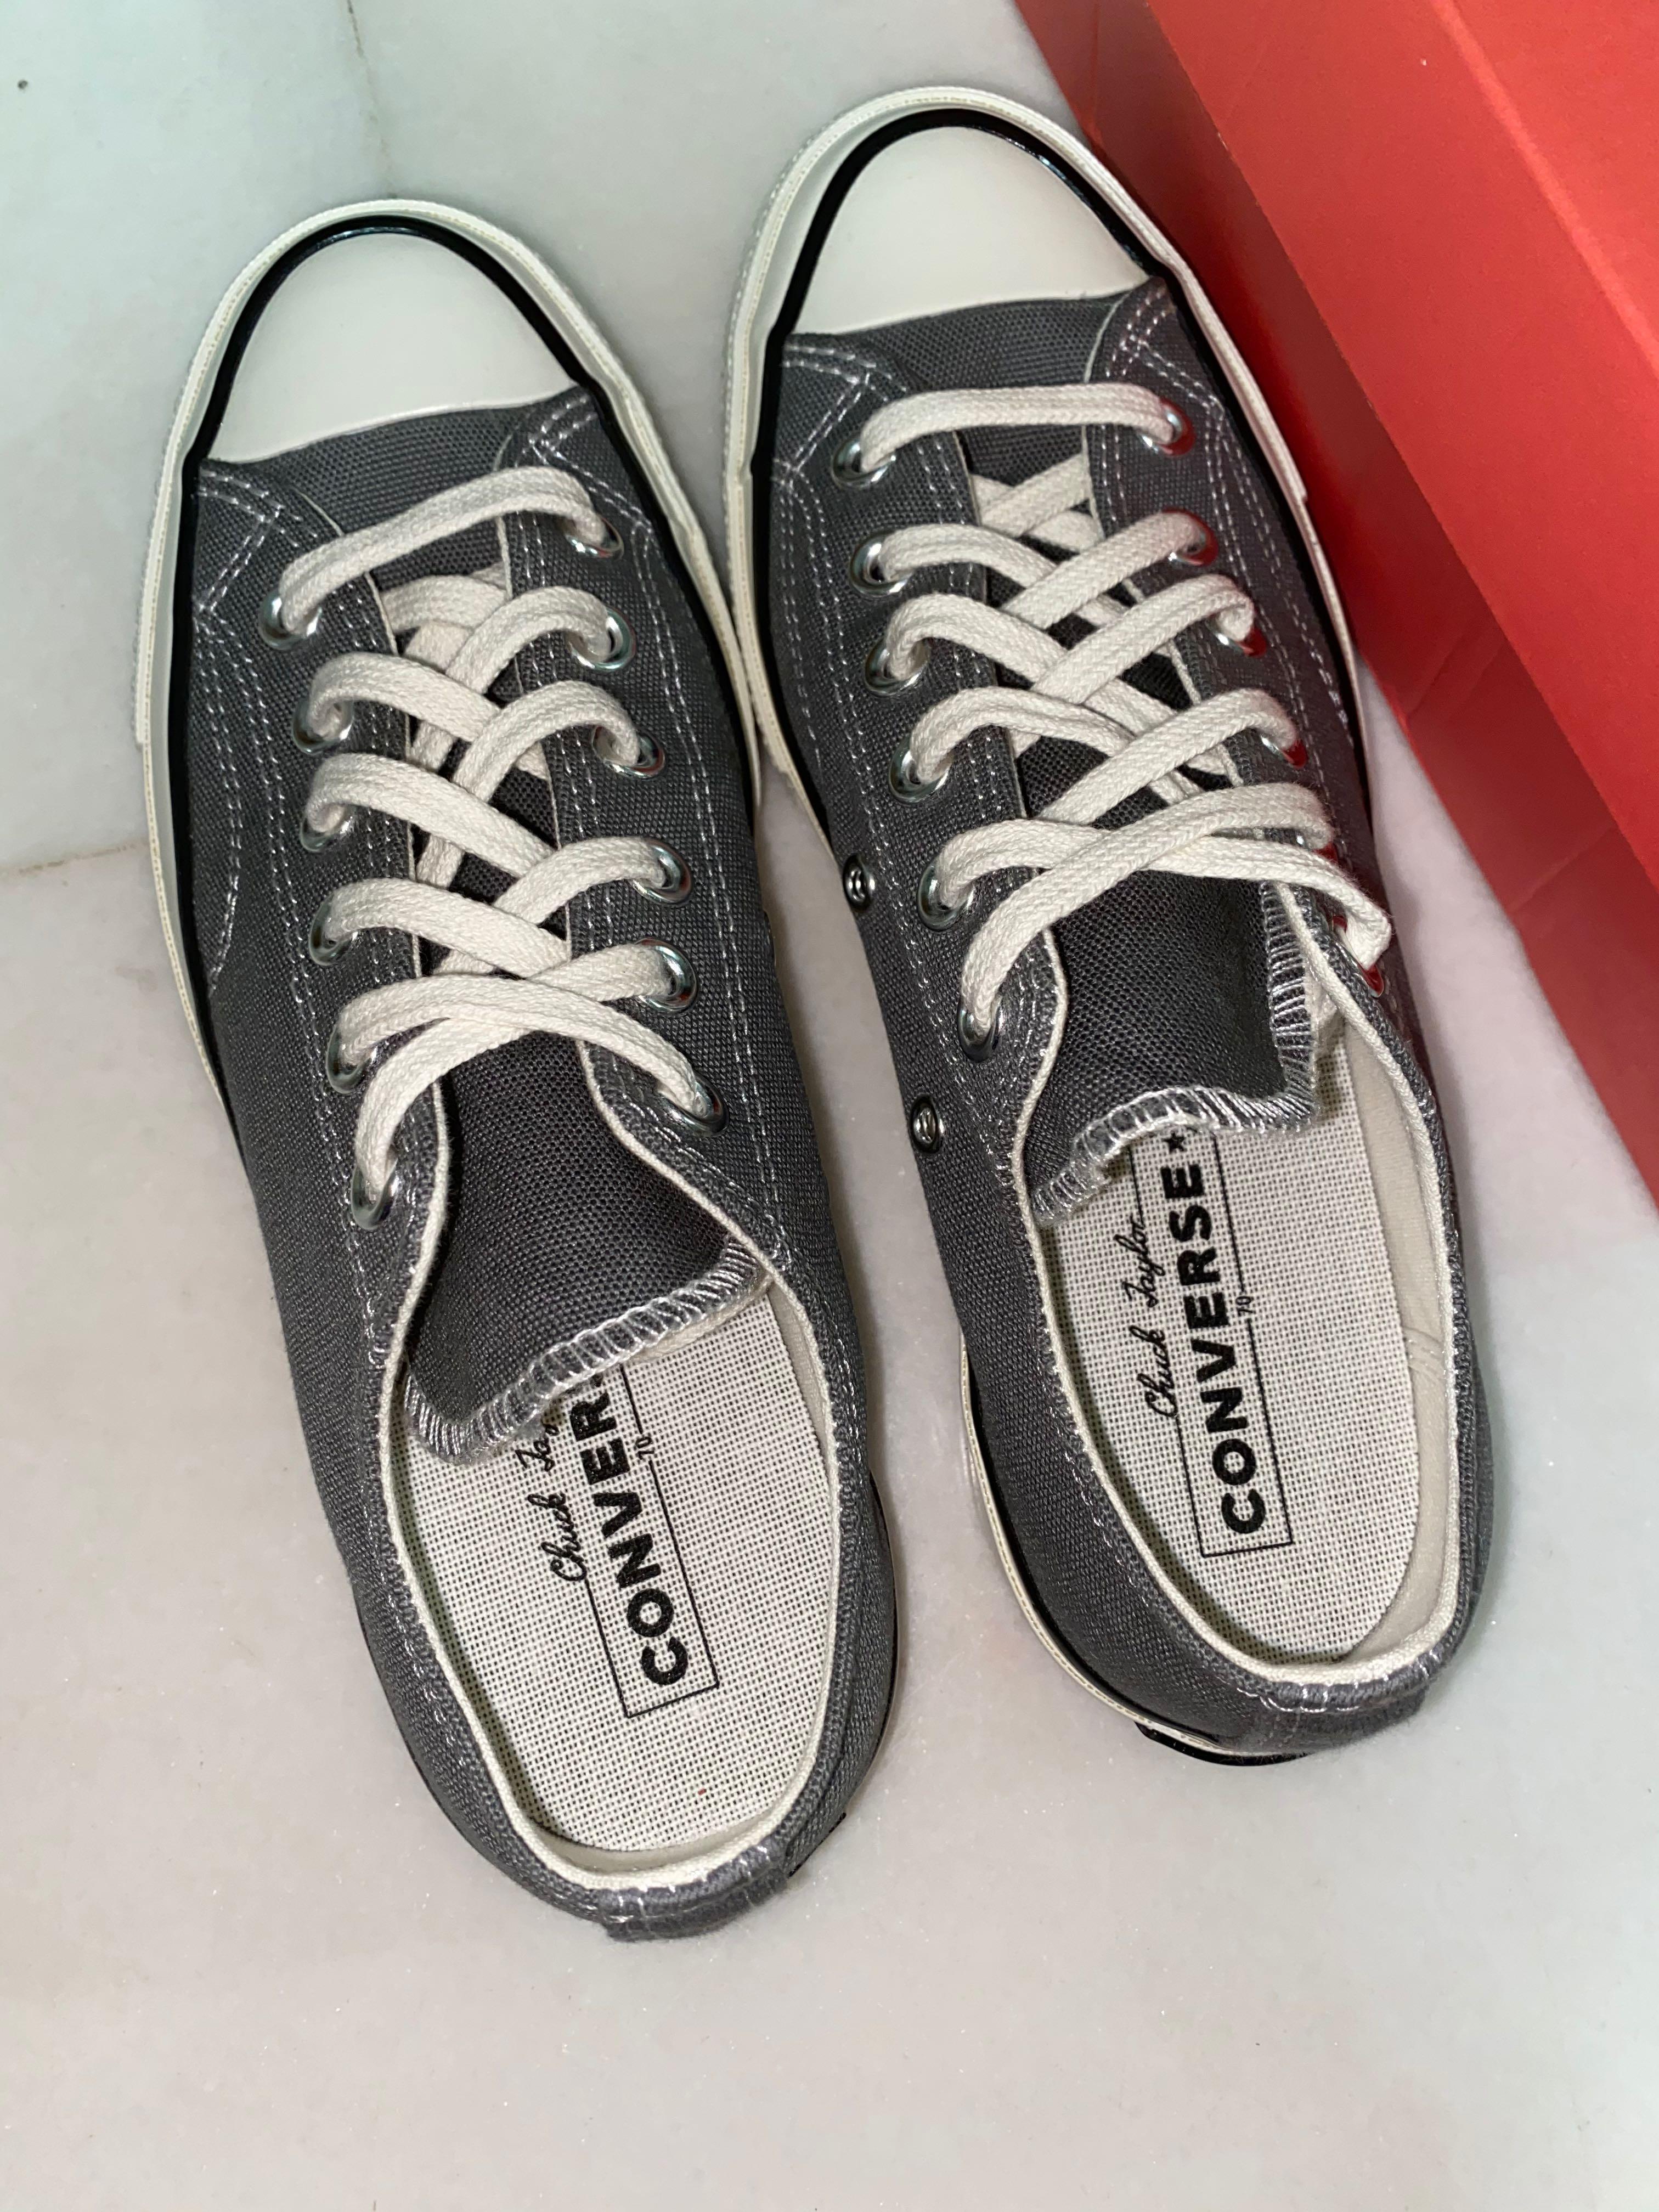 Converse Chuck Taylor 70 Low Cut in 